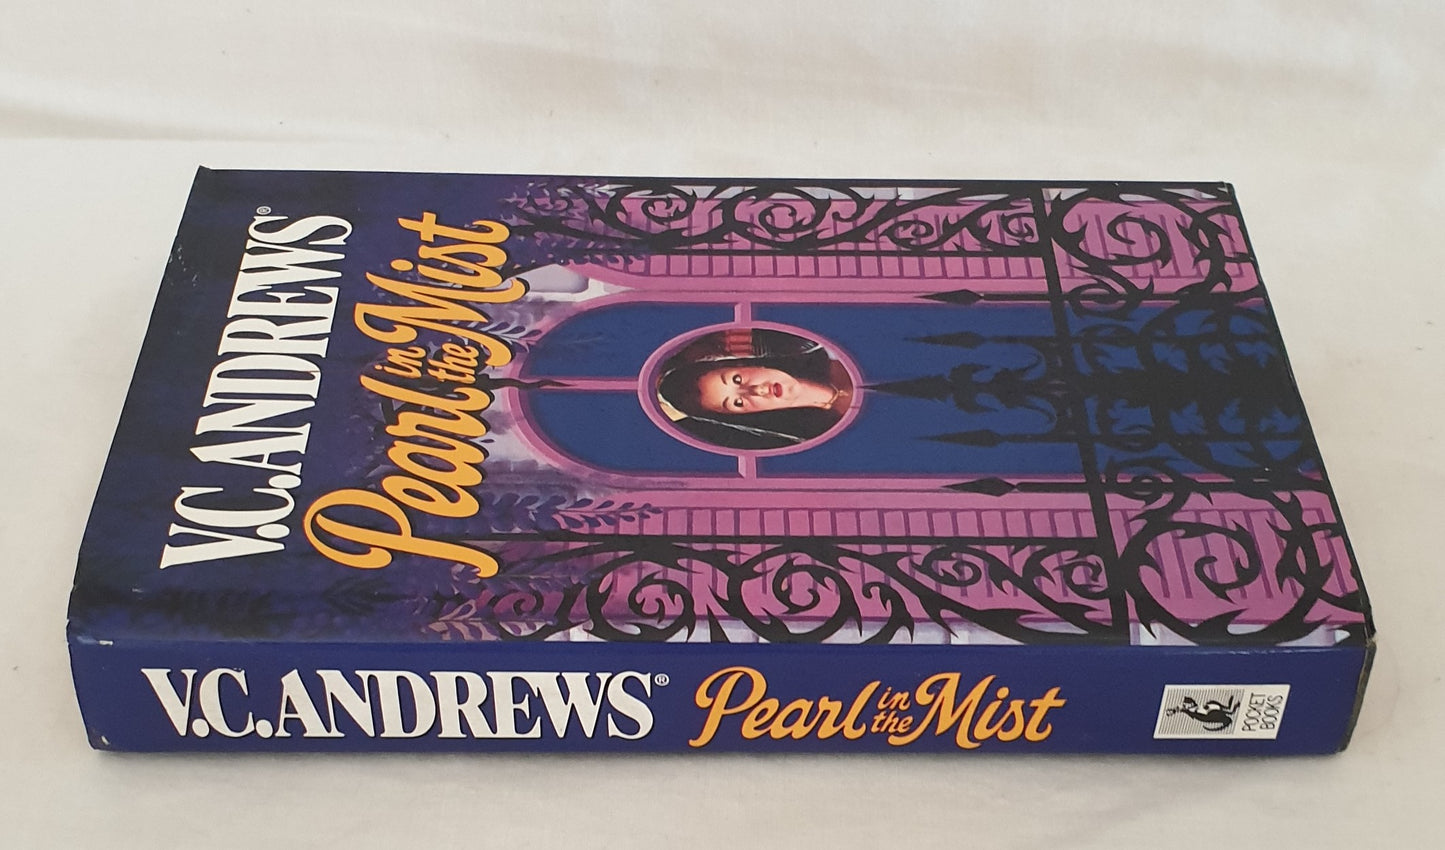 Pearl in the Mist by V. C. Andrews